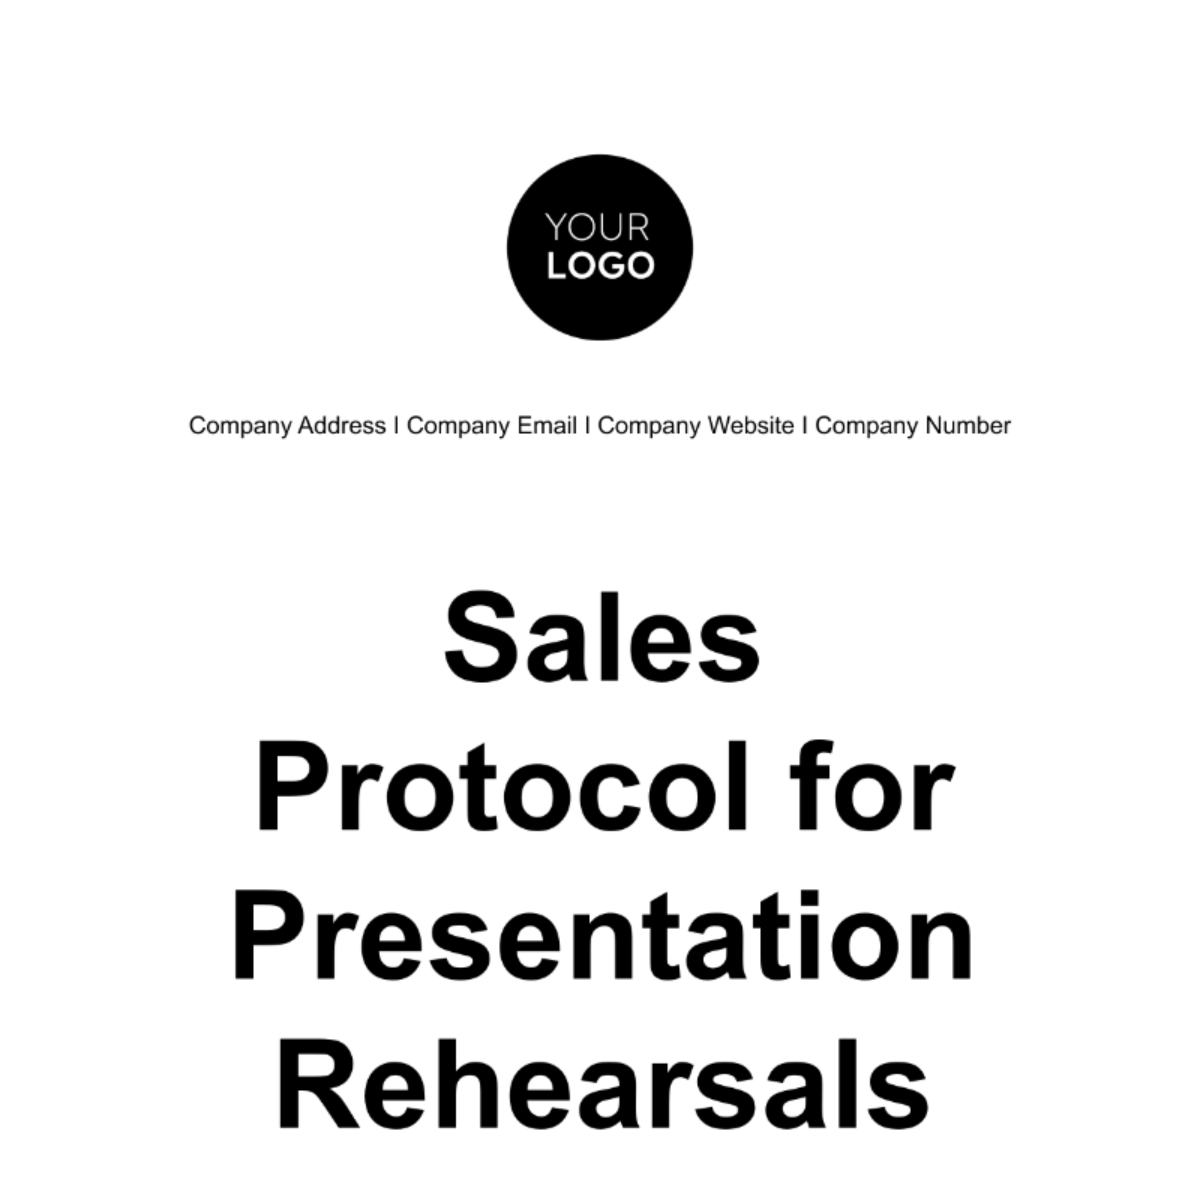 Free Sales Protocol for Presentation Rehearsals Template